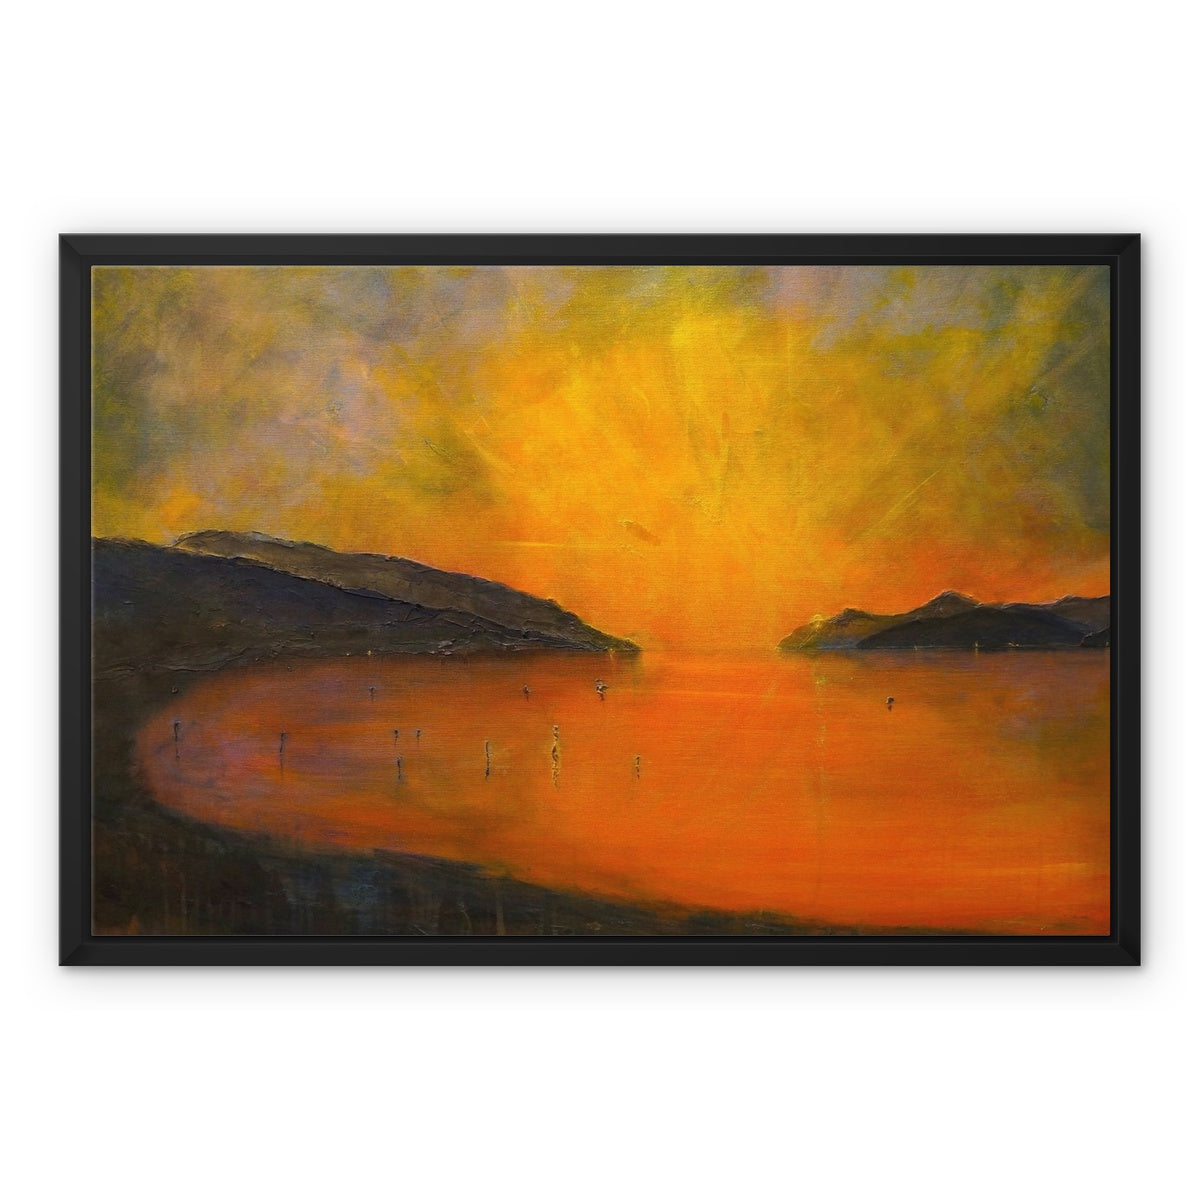 Loch Ness Sunset Painting | Framed Canvas-Floating Framed Canvas Prints-Scottish Lochs & Mountains Art Gallery-24"x18"-Black Frame-Paintings, Prints, Homeware, Art Gifts From Scotland By Scottish Artist Kevin Hunter